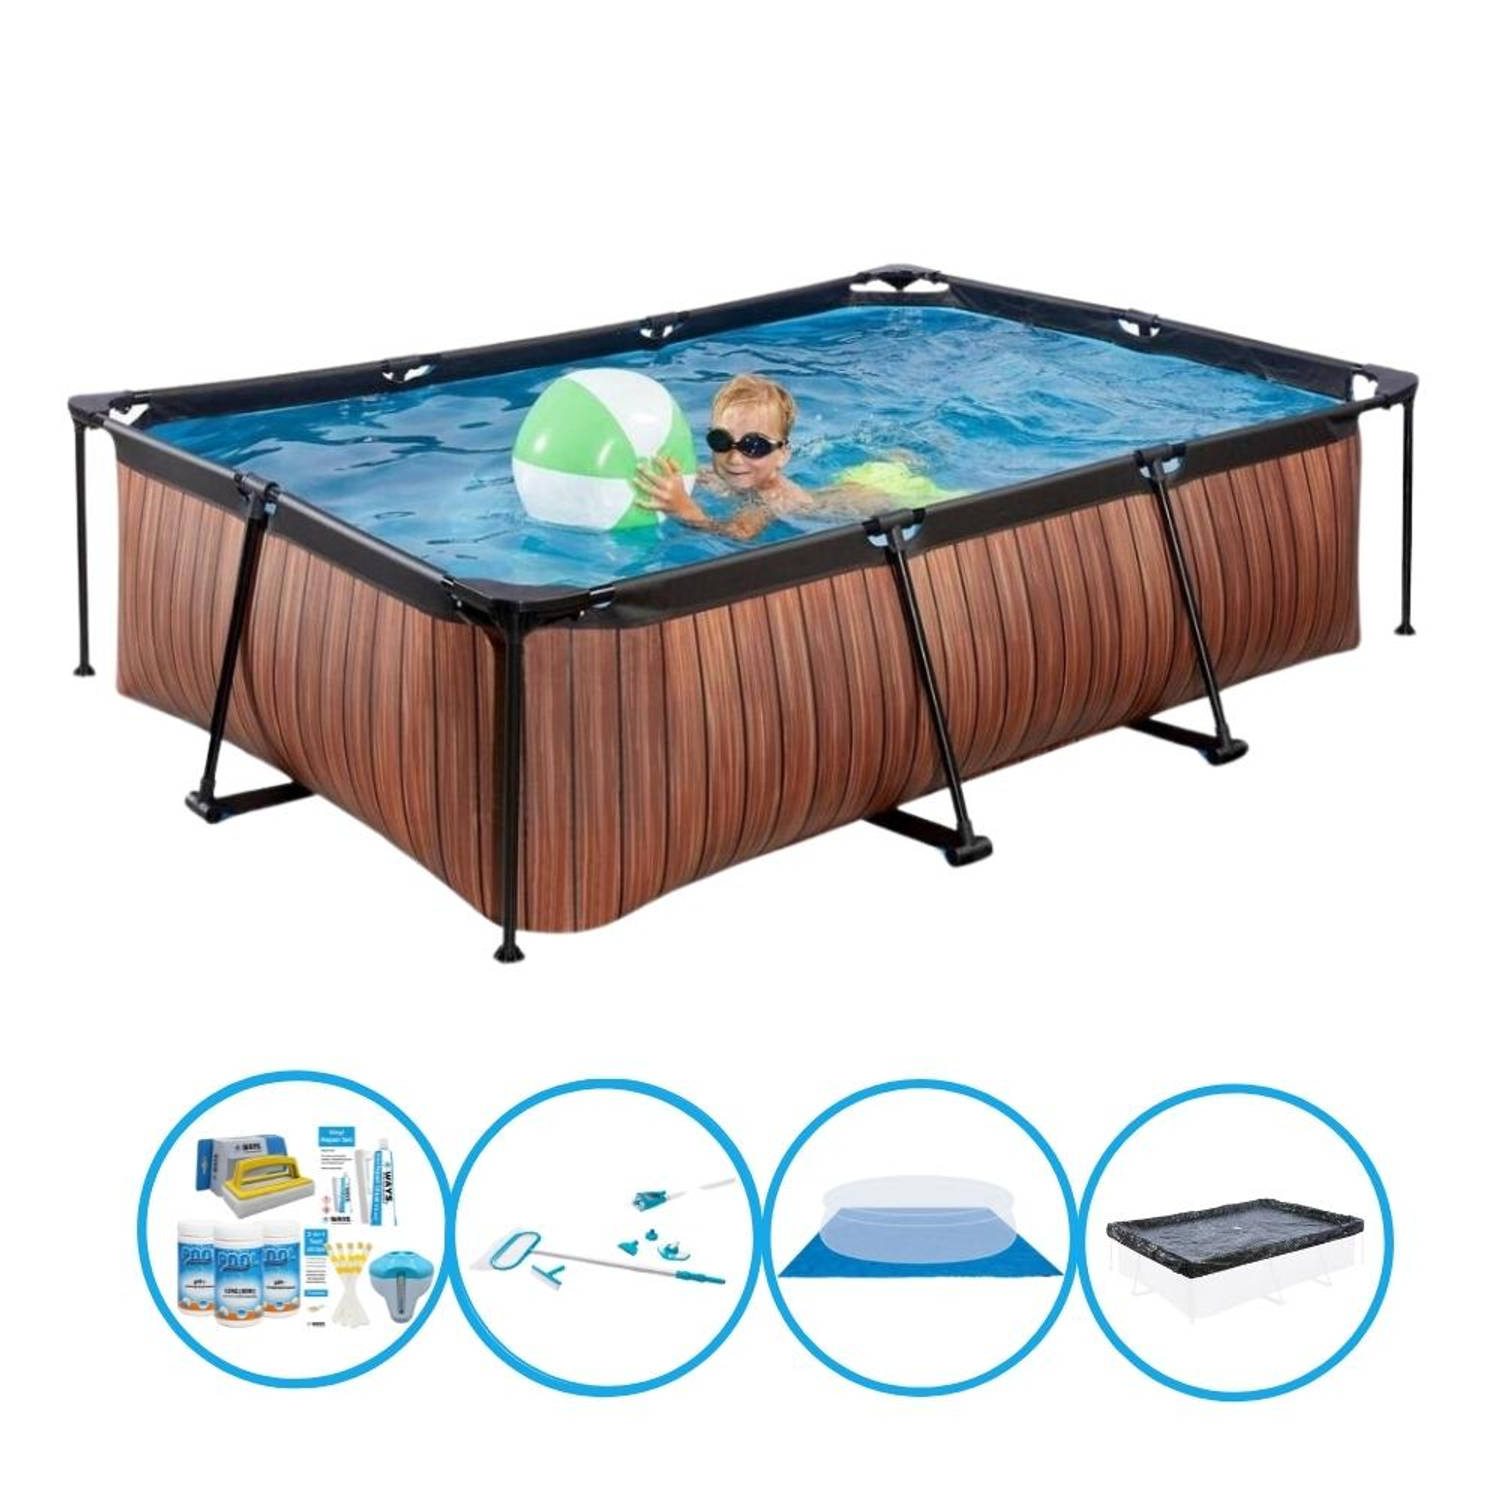 EXIT Toys Exit Zwembad Timber Style - Frame Pool 220x150x60 Cm - Compleet Zwembadpakket - Bruin